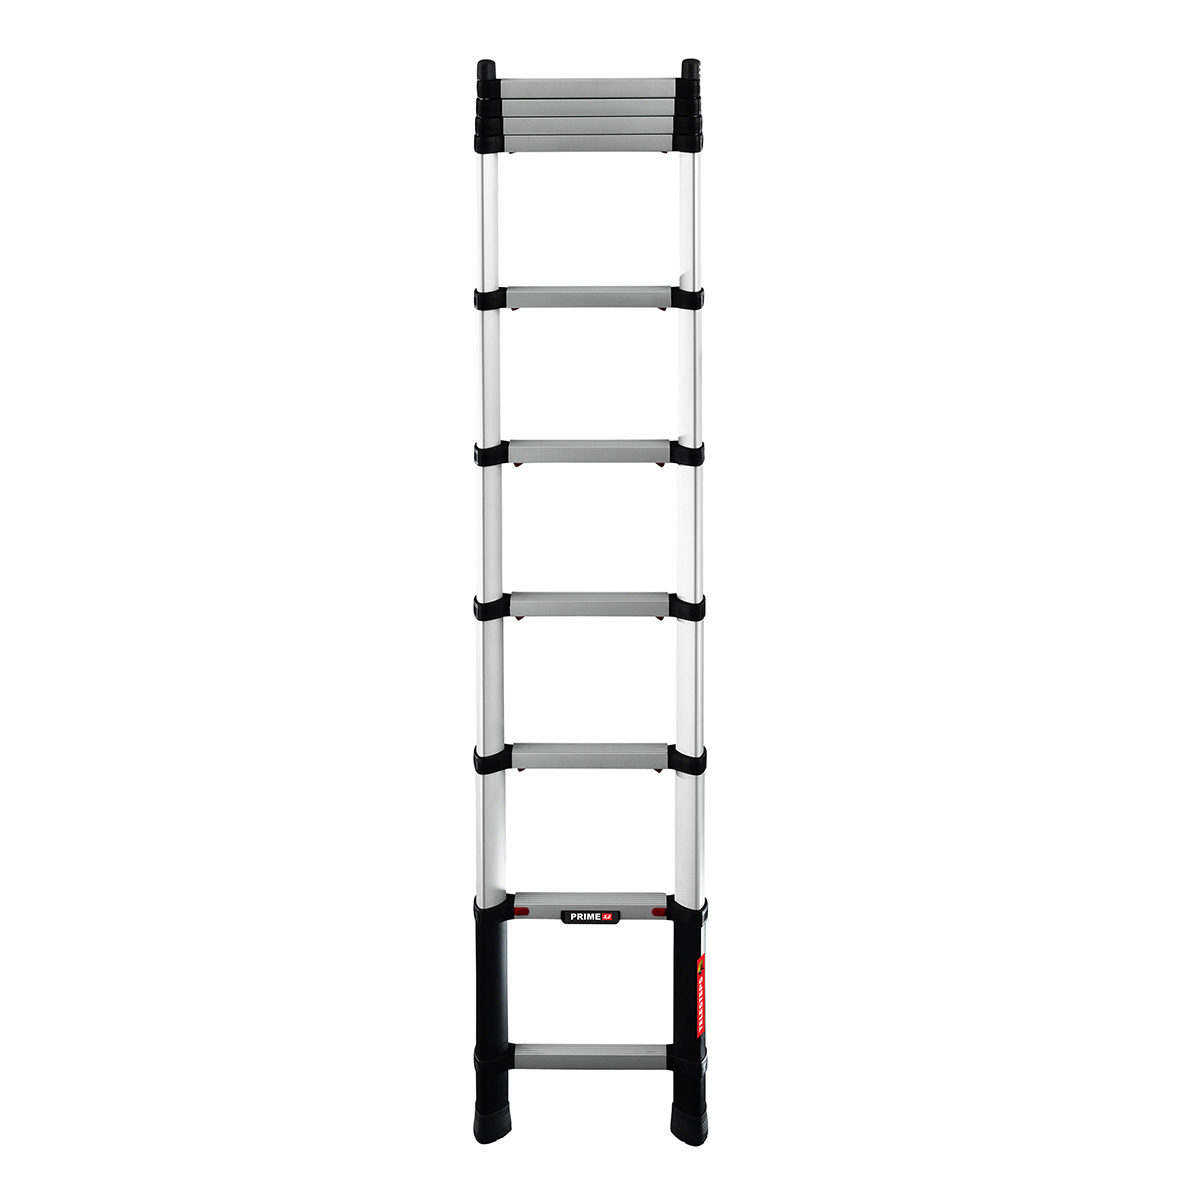 prime-line-32-front-intermediate-leaning-ladders-1200x1200